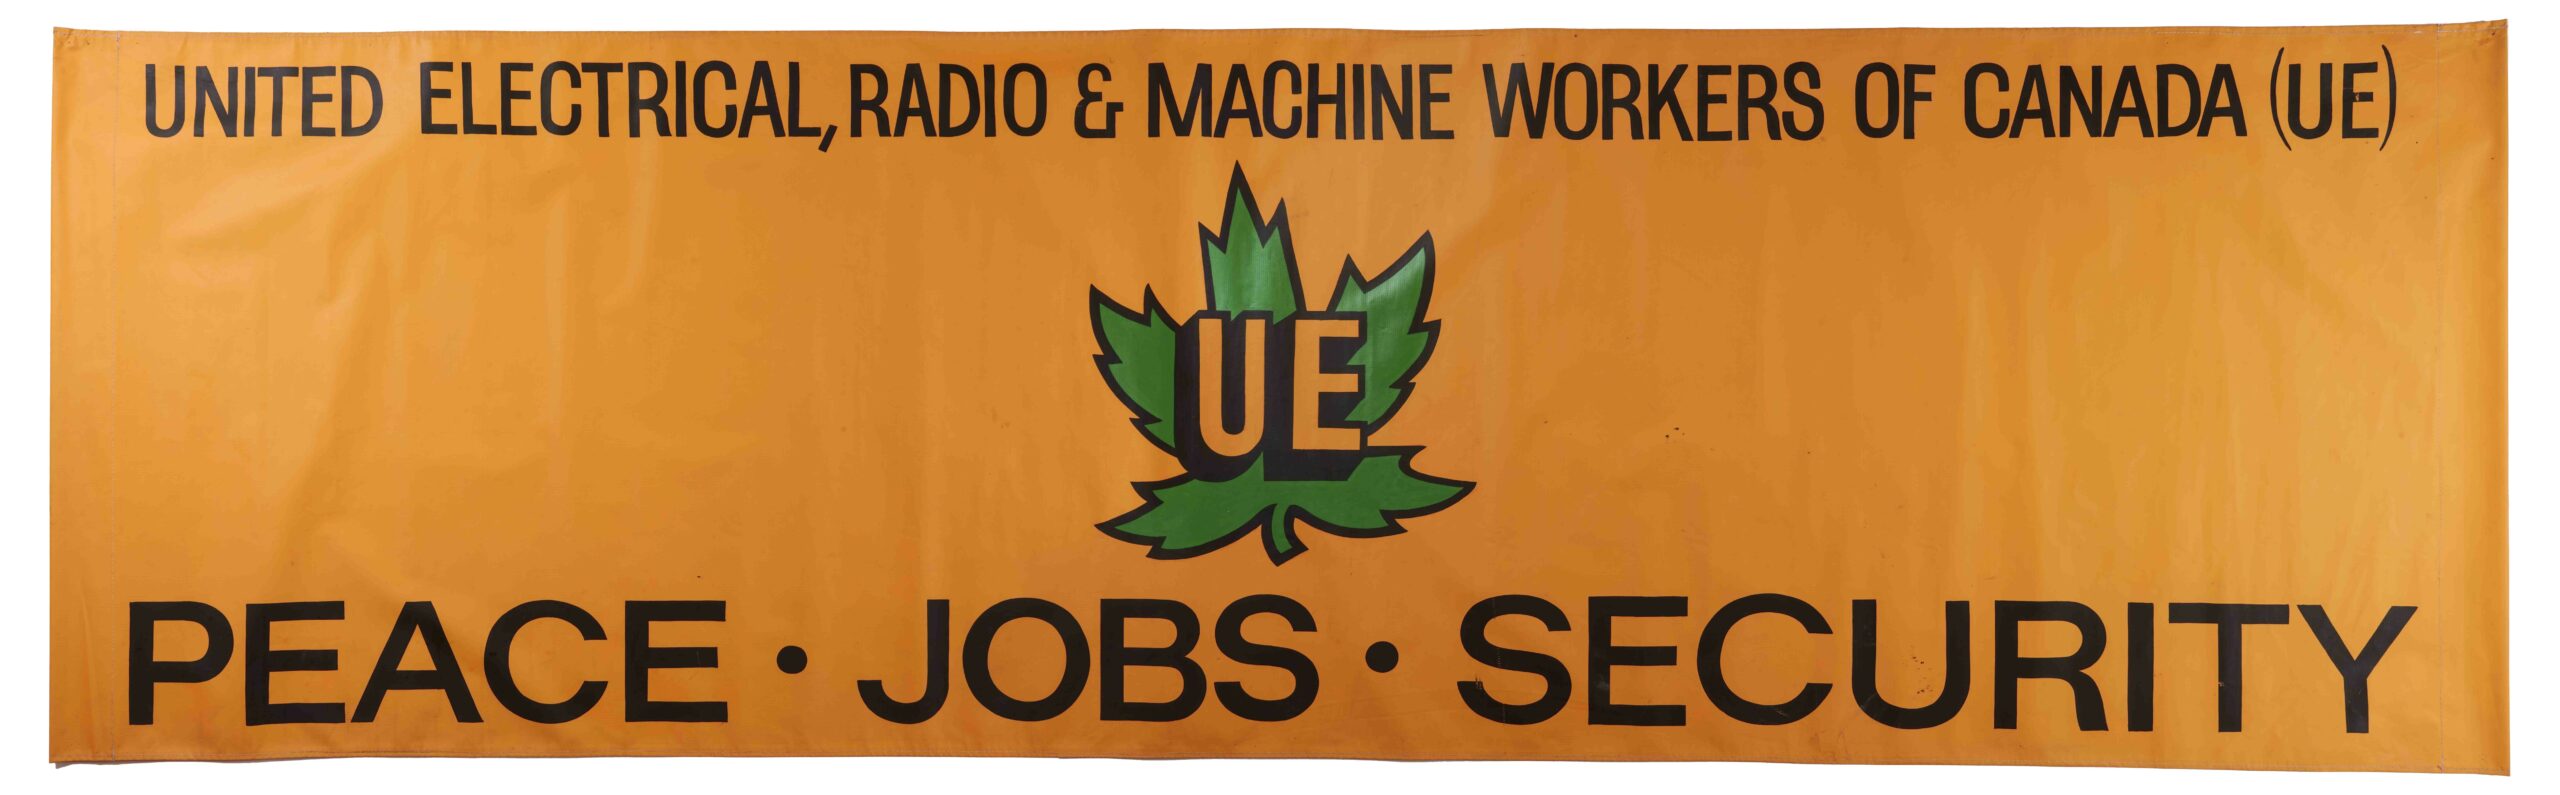 Banner, United Electrical, Radio & Machine Workers of Canada